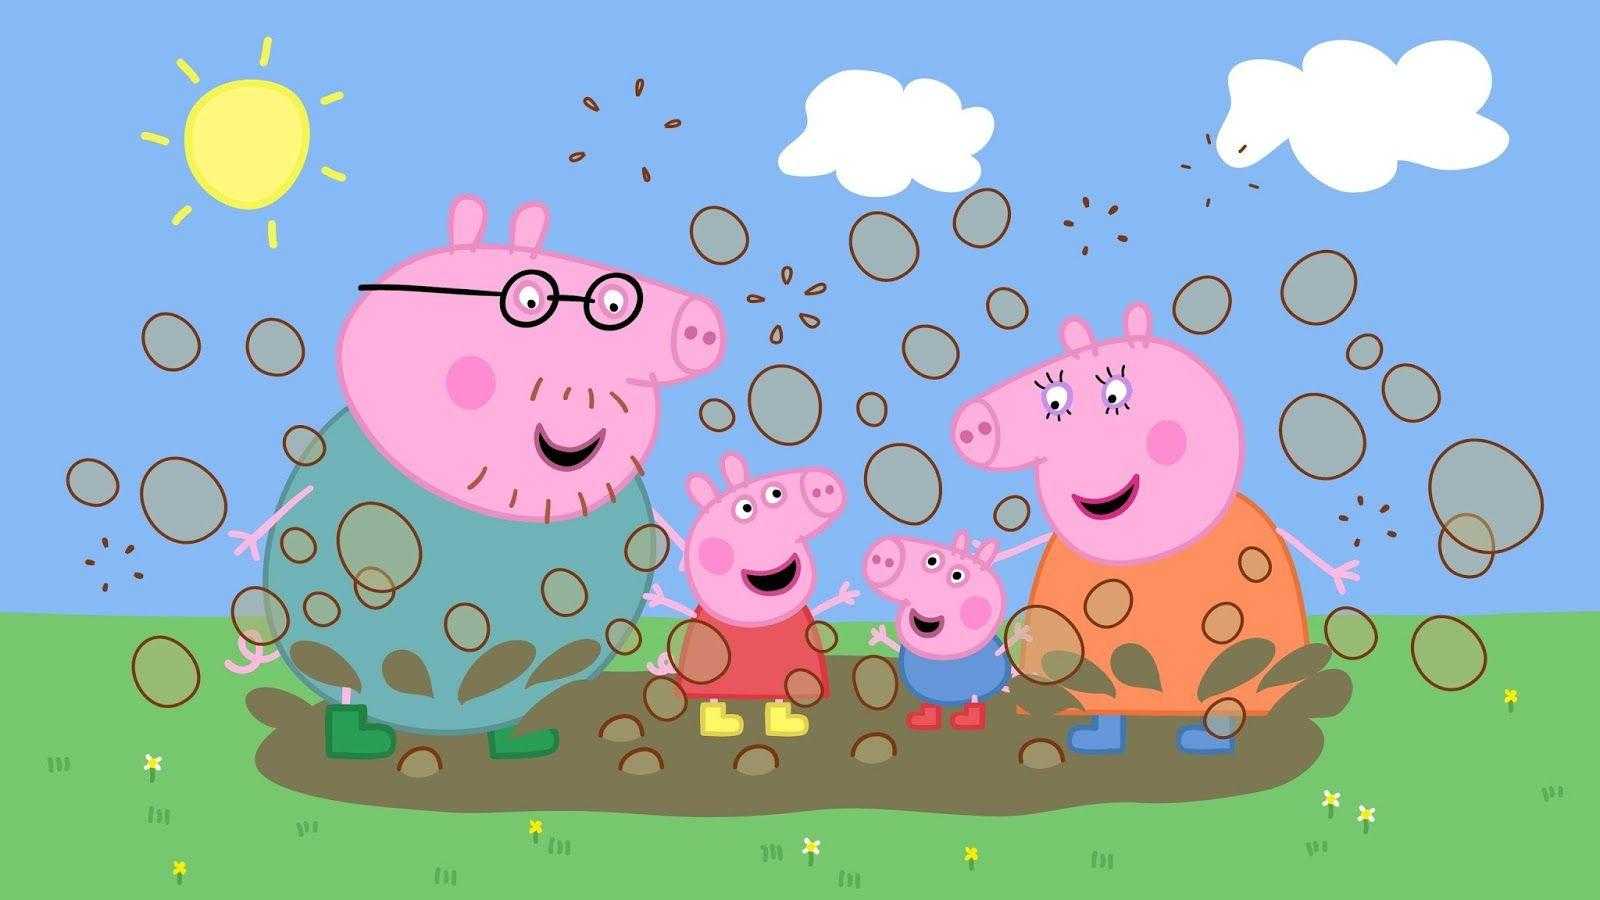 Peppa Pig wallpaper with high-resolution 1920x1080 pixel. You can use this wallpaper for your Windows and Mac OS computers as well as your Android and iPhone smartphones - George Pig, Peppa Pig